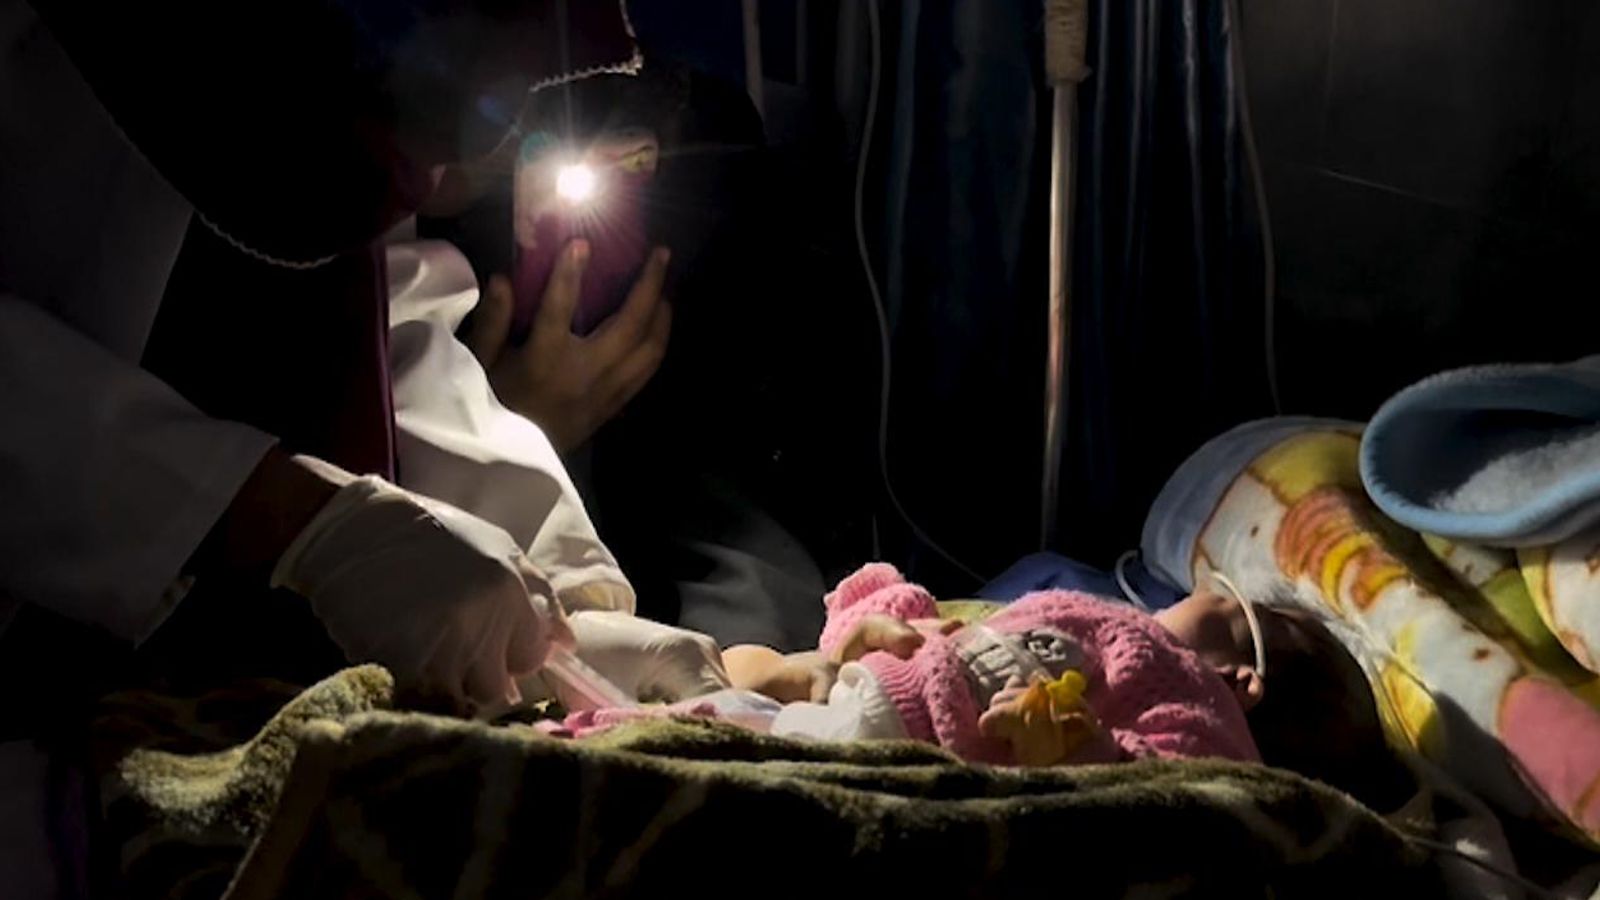 The Gaza hospital where treatment is by torchlight and '13 babies died of malnutrition on one day'